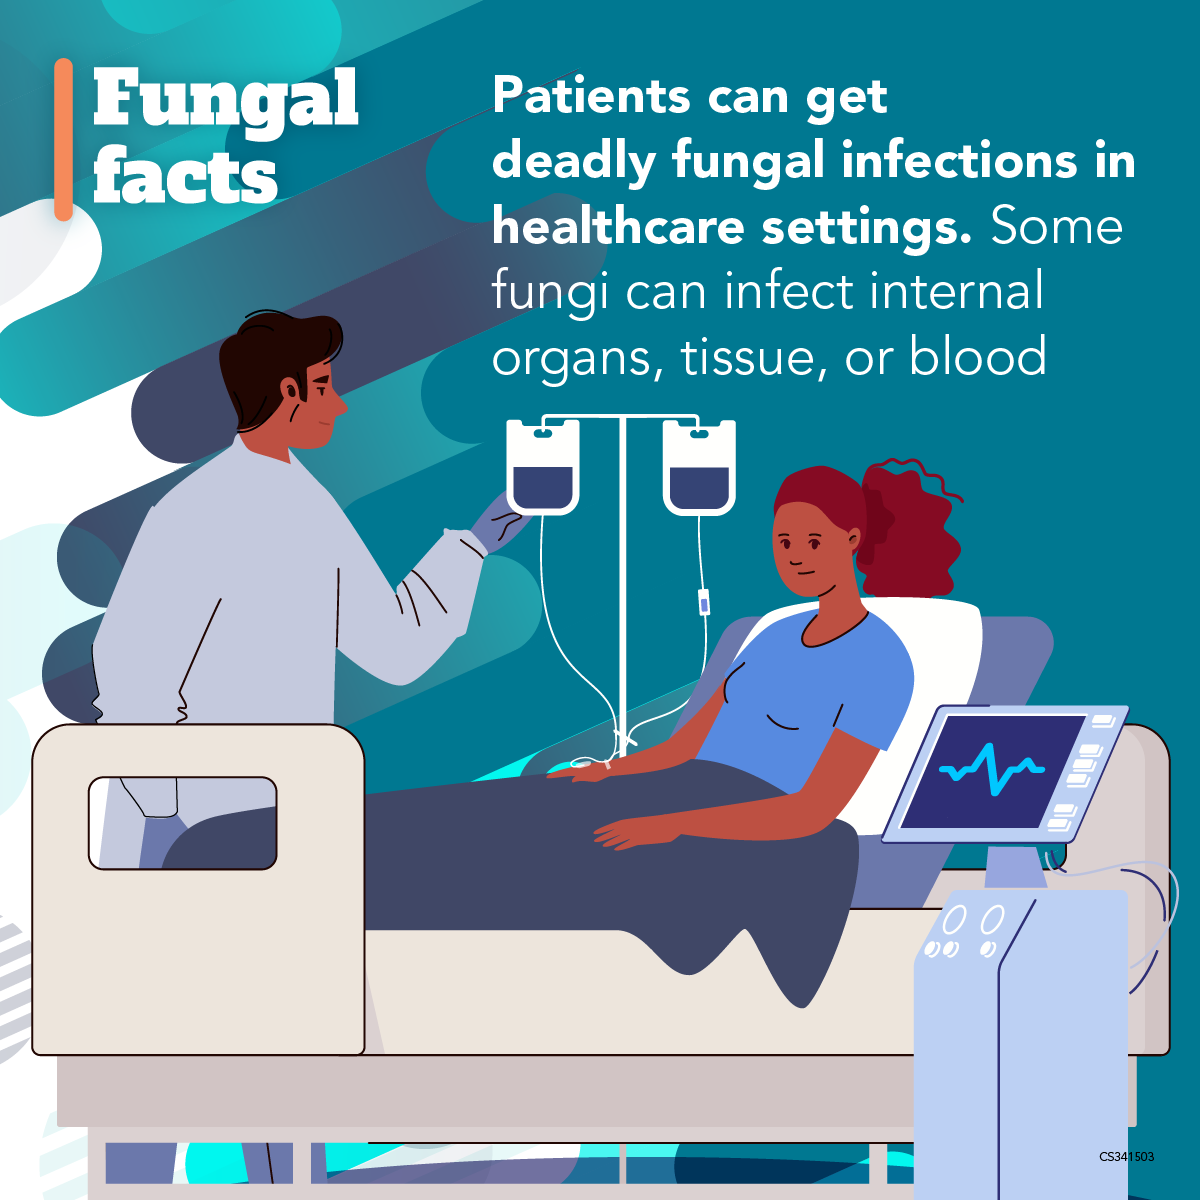 Image of a doctor at a patient's bedside. The patient has an IV and monitors. Text reads: Patients can get deadly fungal infections in healthcare settings. Some fungi can infect internal organs, tissue, or blood.